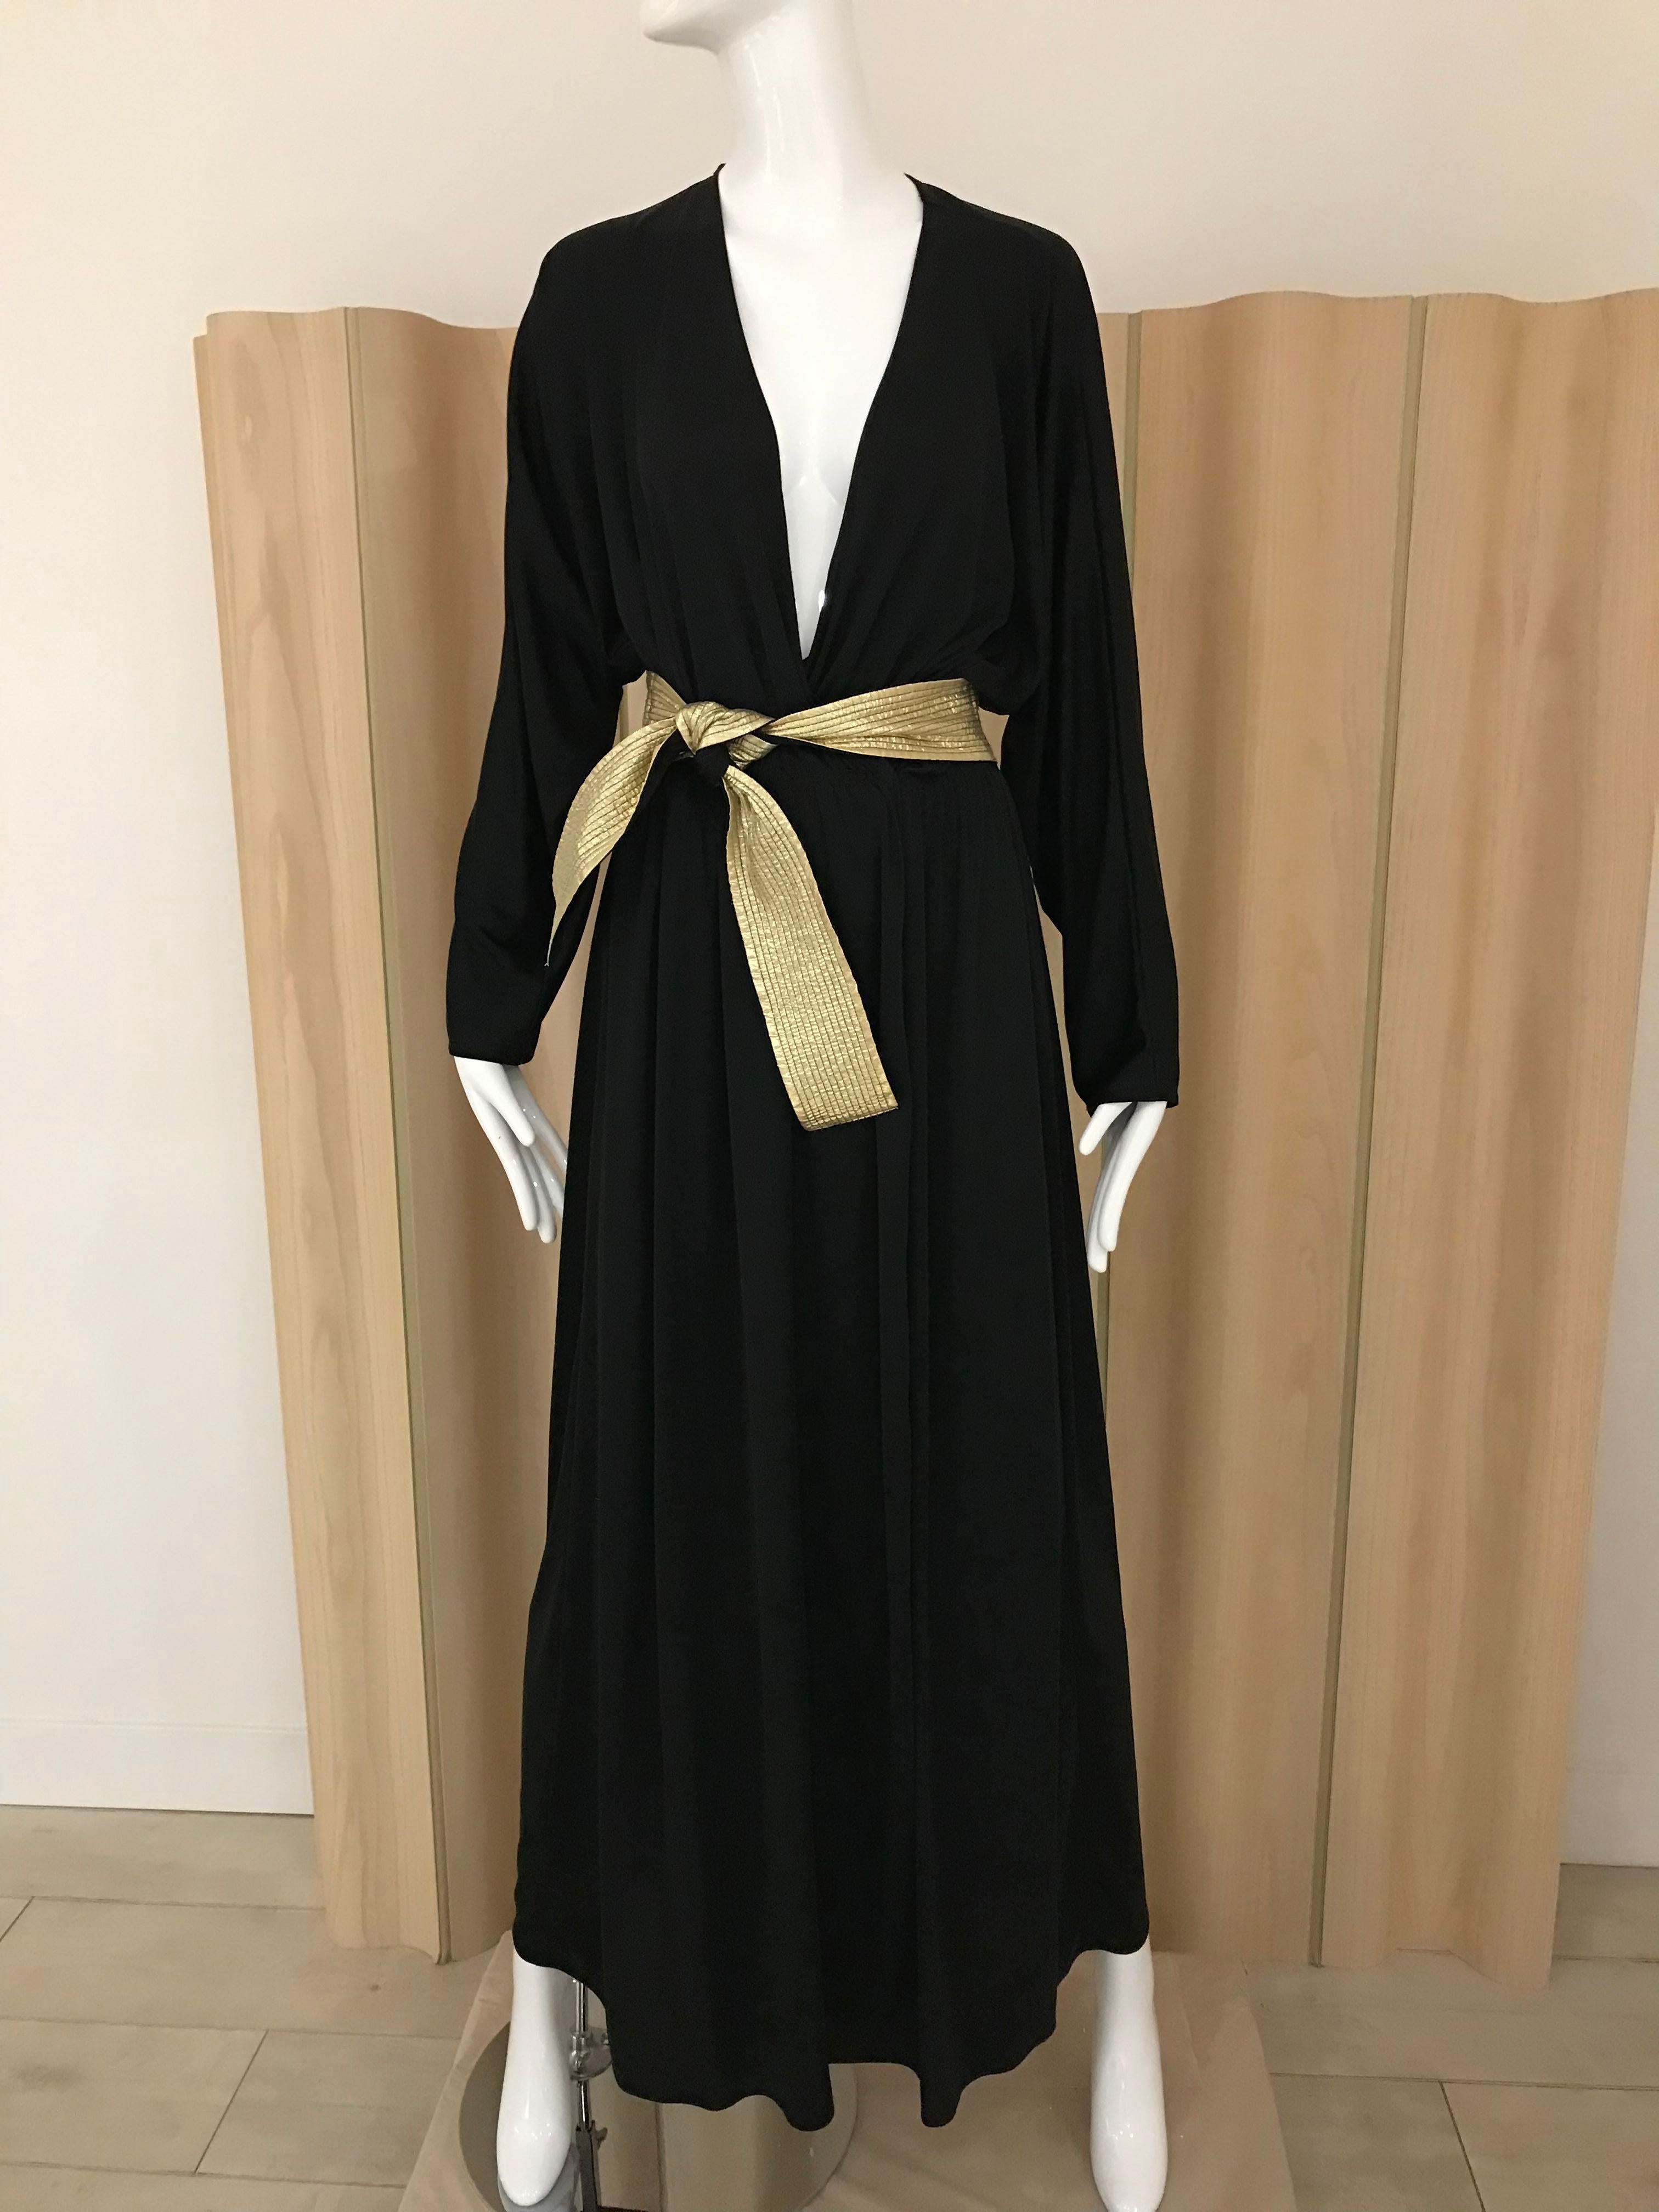 Sexy timeless 1970s Bill Tice black jersey V neck dress with gold sash. Perfect for studio 54 party.
Fit size : Medium
